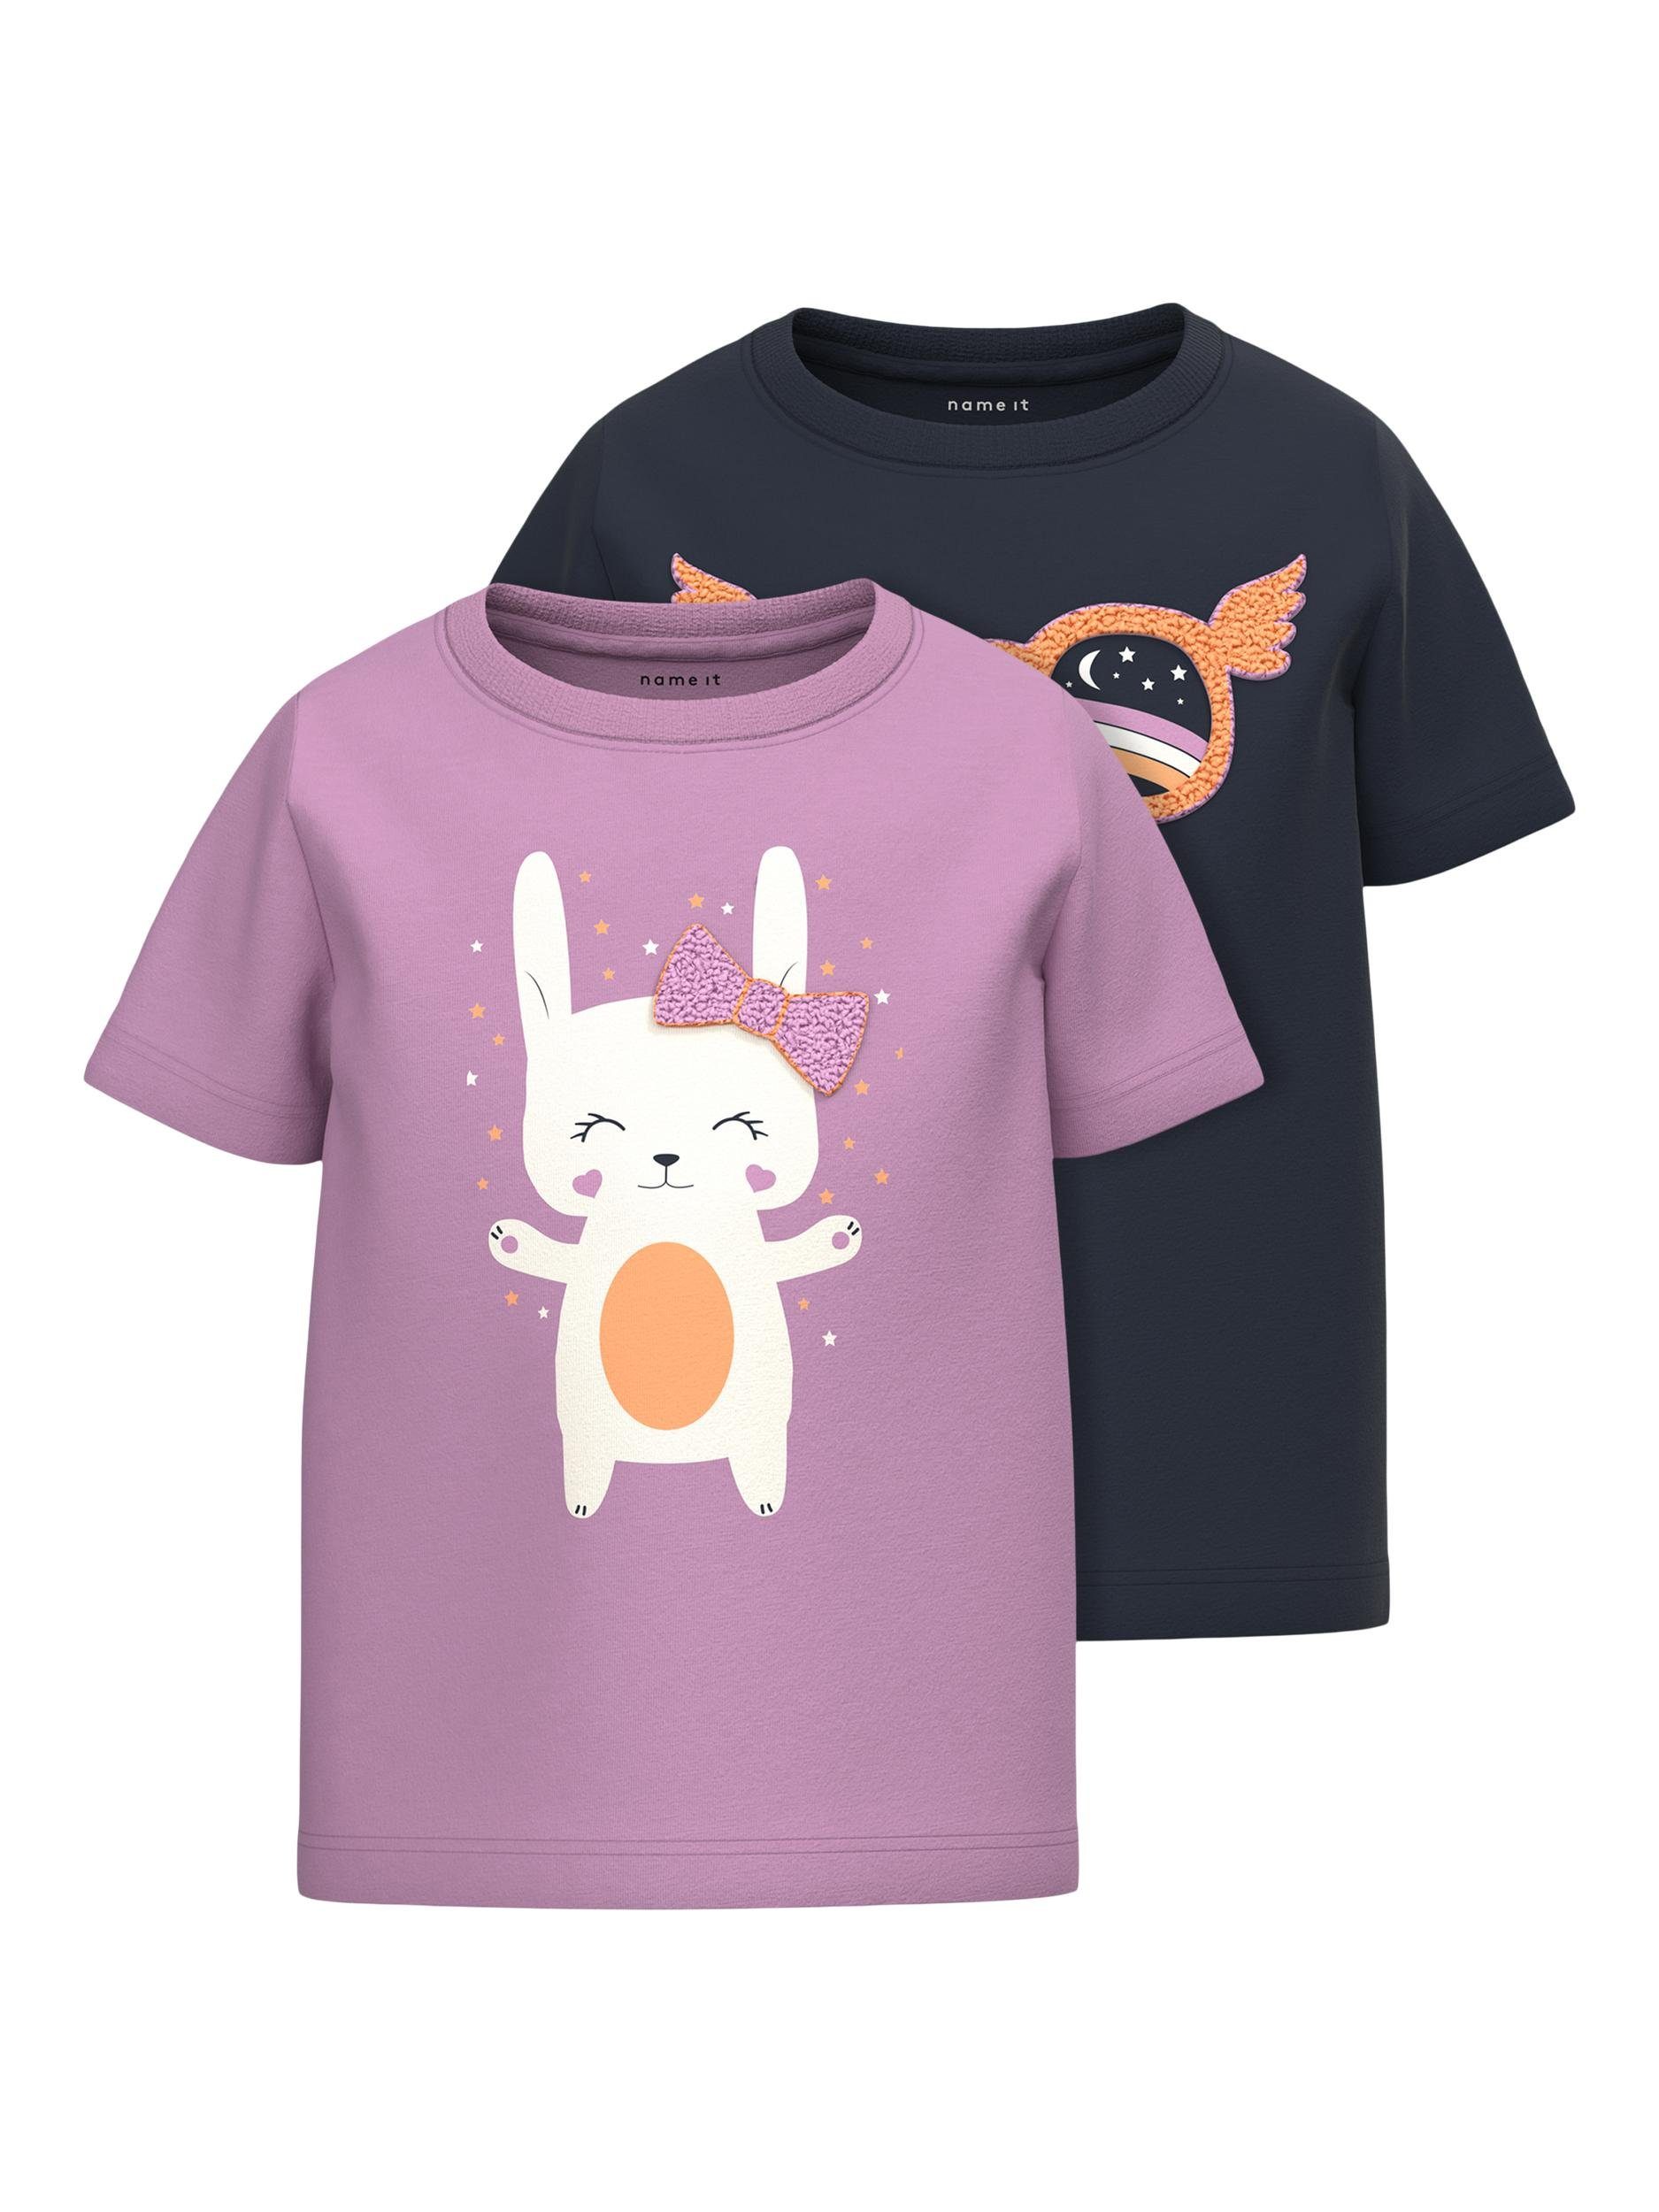 2P PB NMFHILDE TOP It Name SS 2-tlg) T-Shirt (Packung,